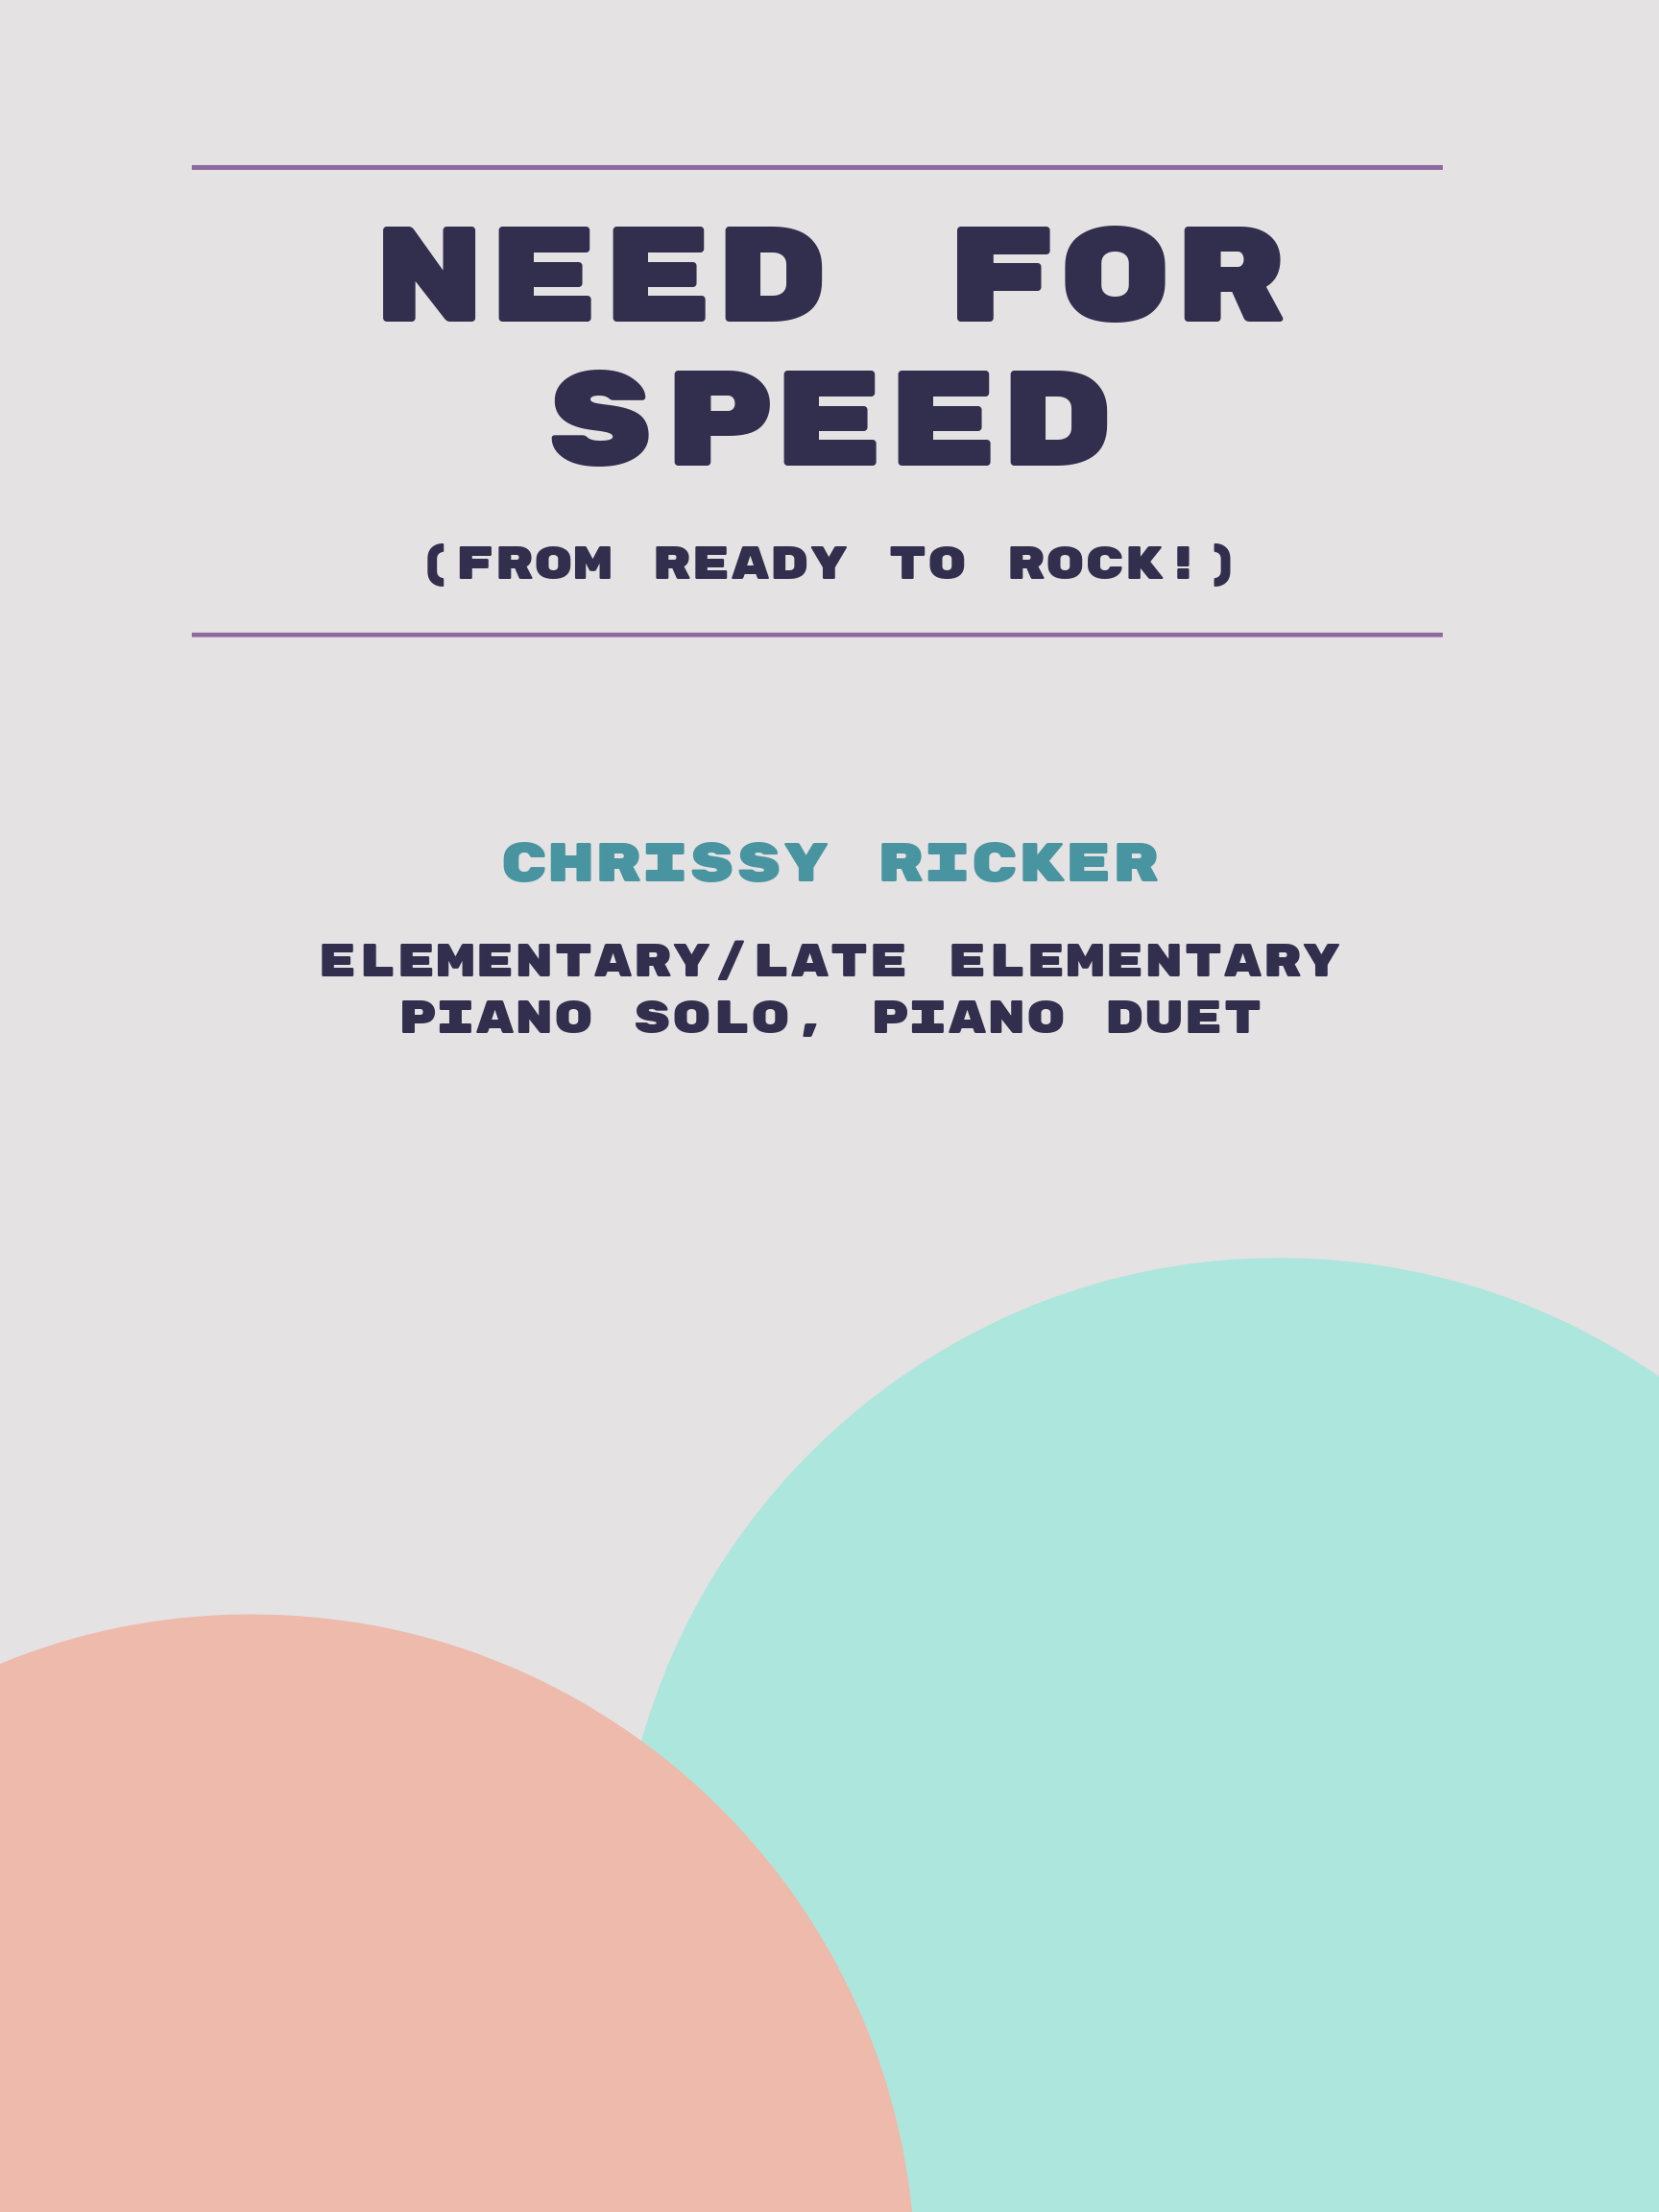 Need for Speed by Chrissy Ricker